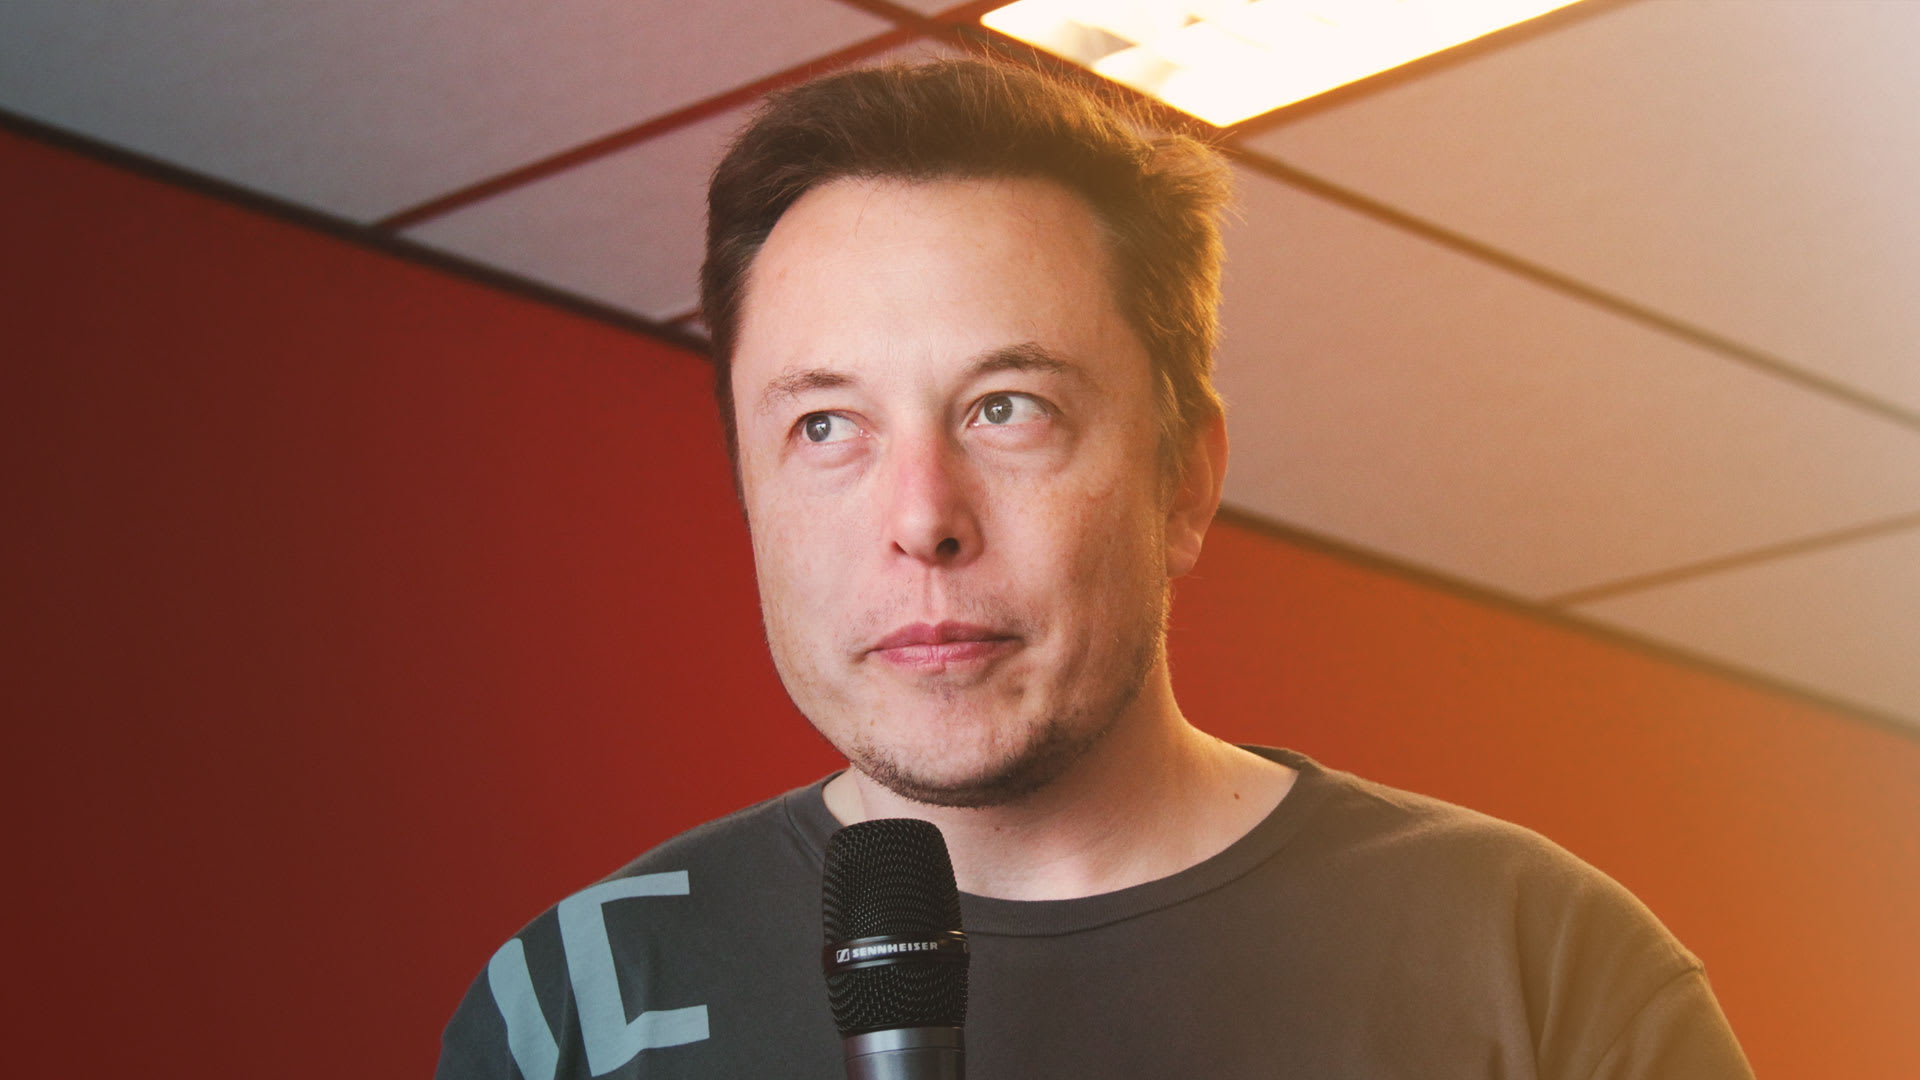 Elon Musk is sad and disappointed by the SEC’s fraud charges